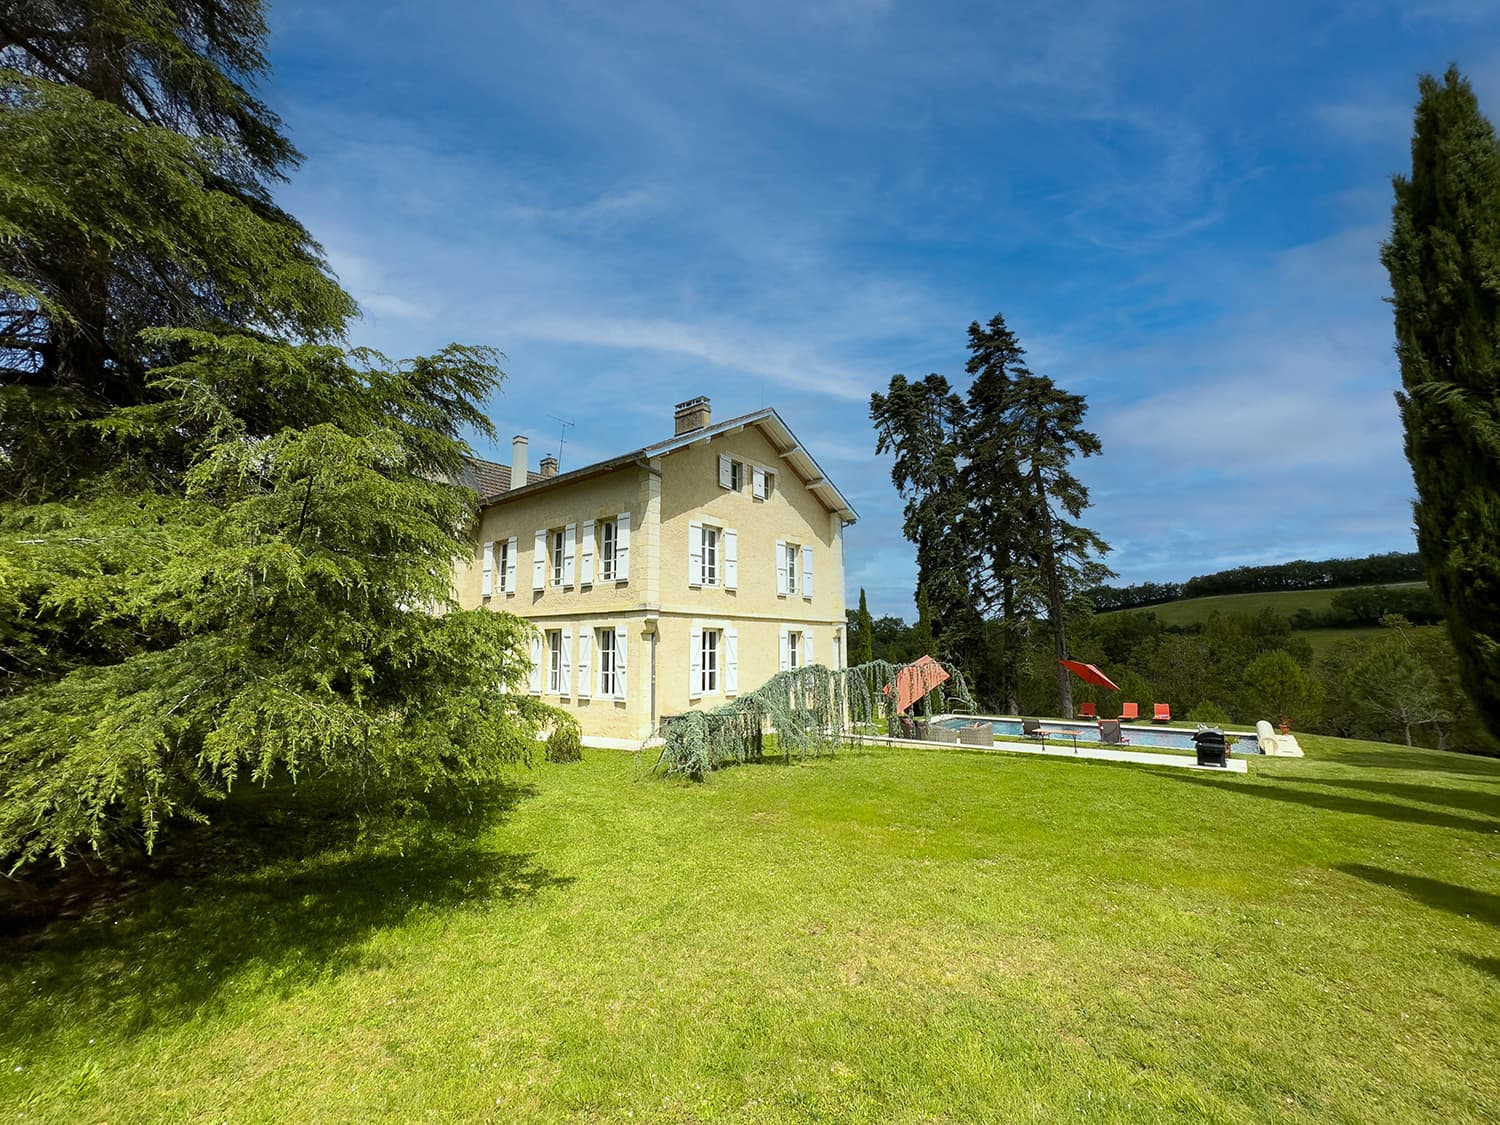 Vacation château in the Gers